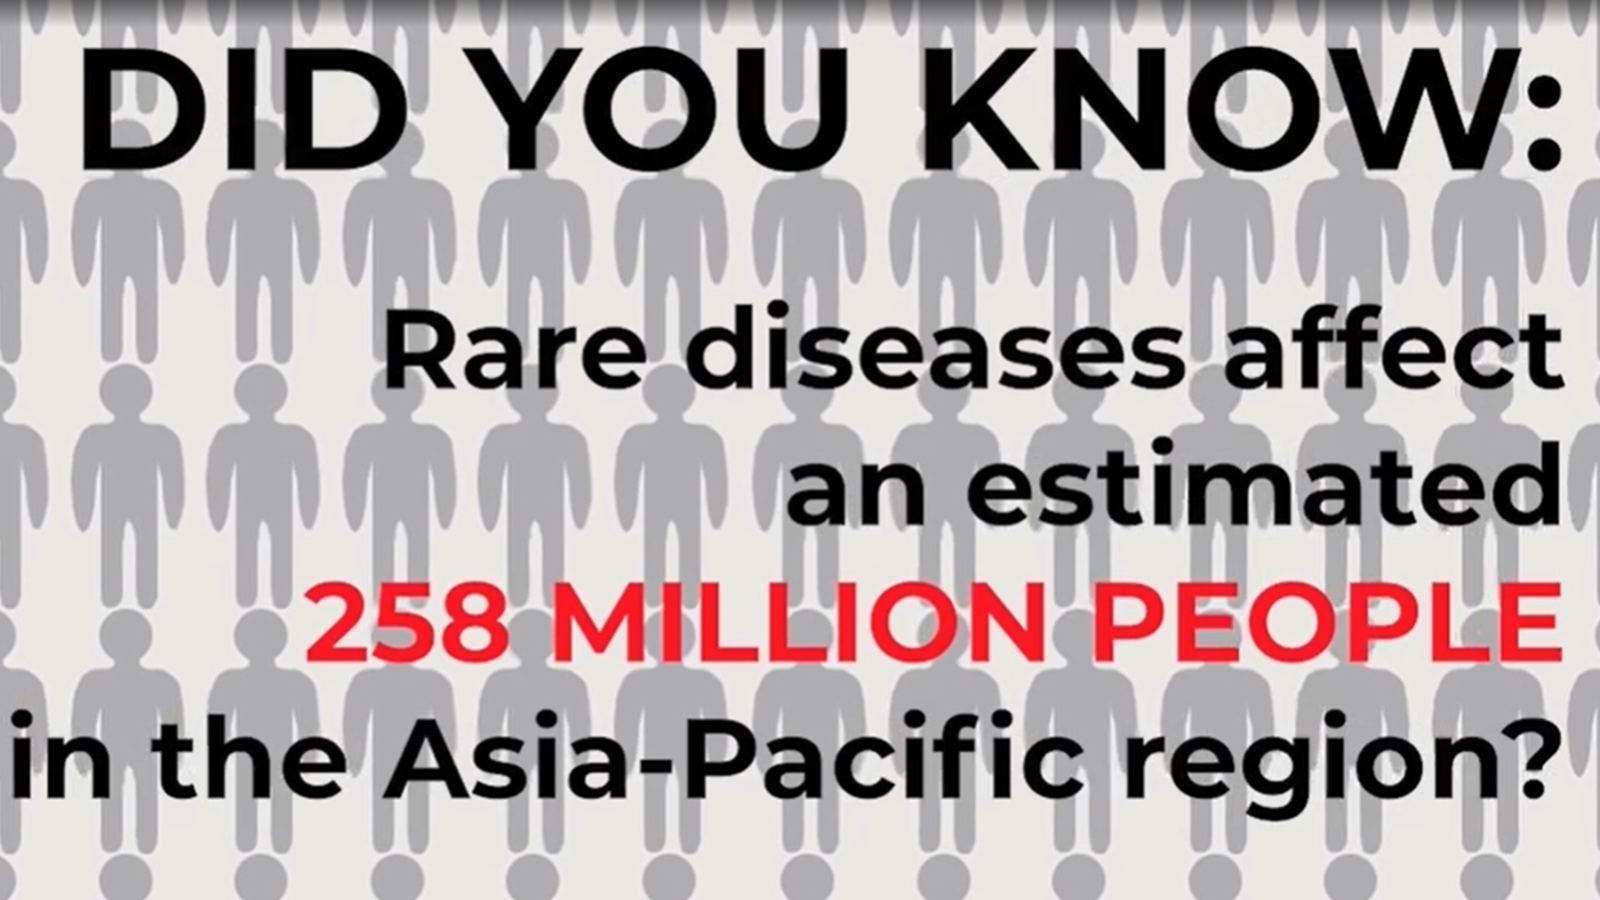 Did you know rare diseases affect 258 million people in Asia PAC?